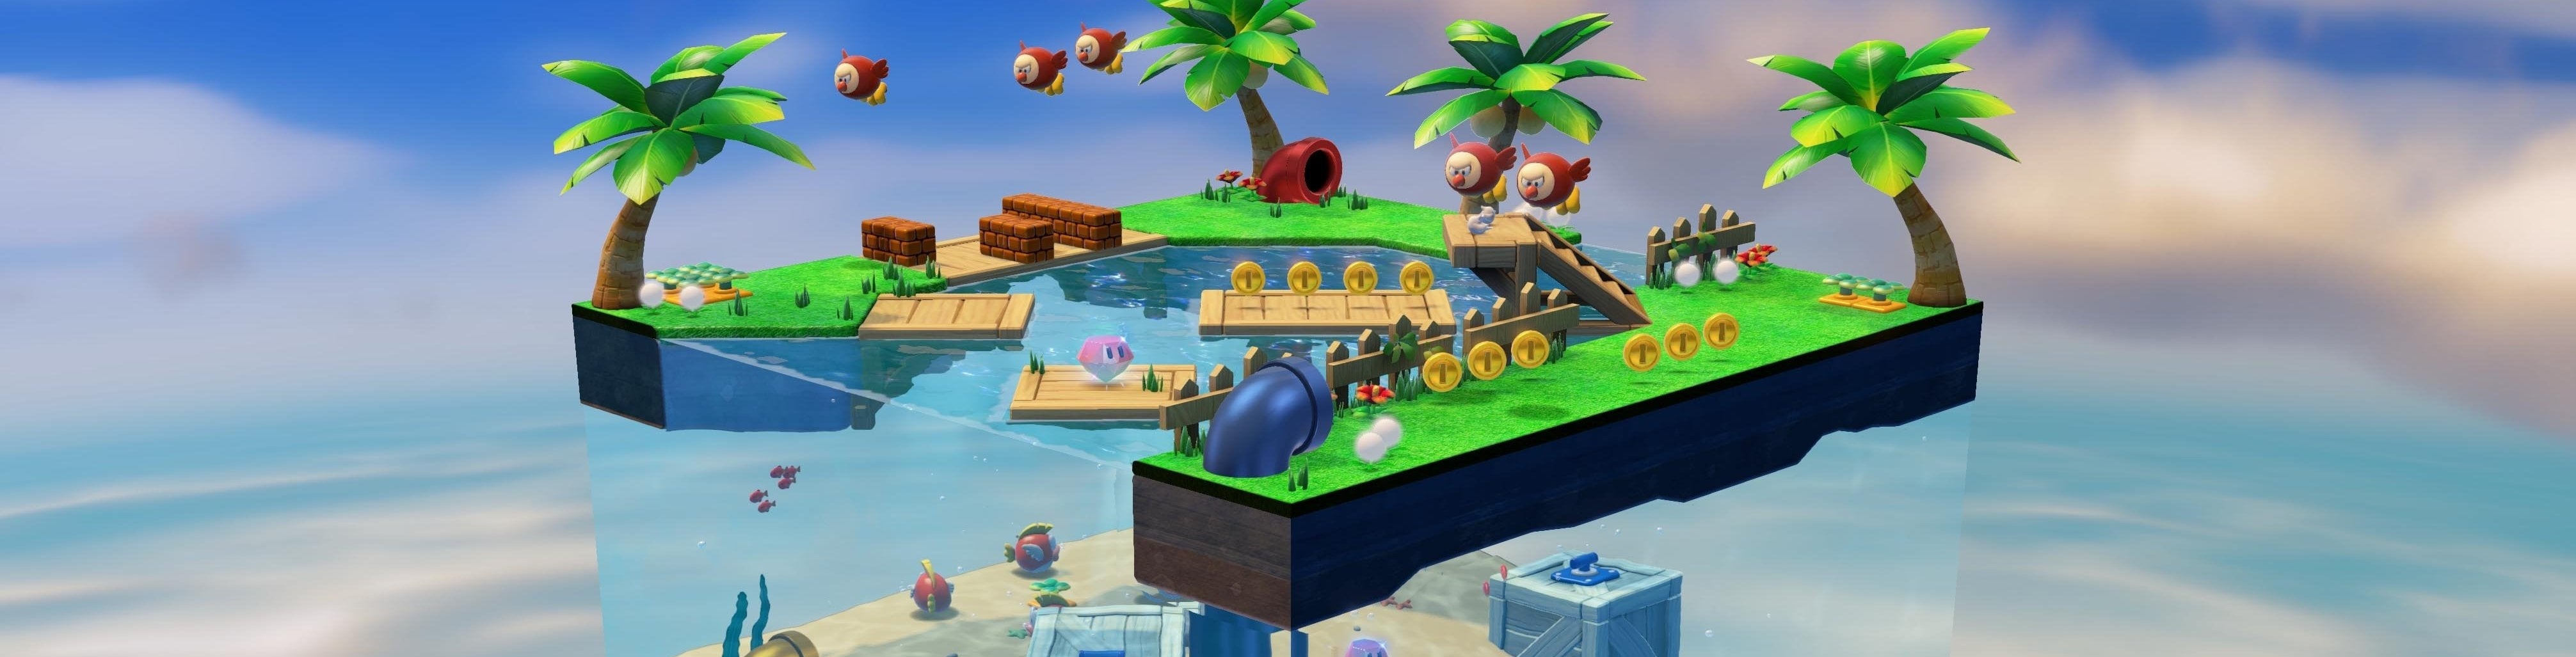 Image for Captain Toad: Treasure Tracker review